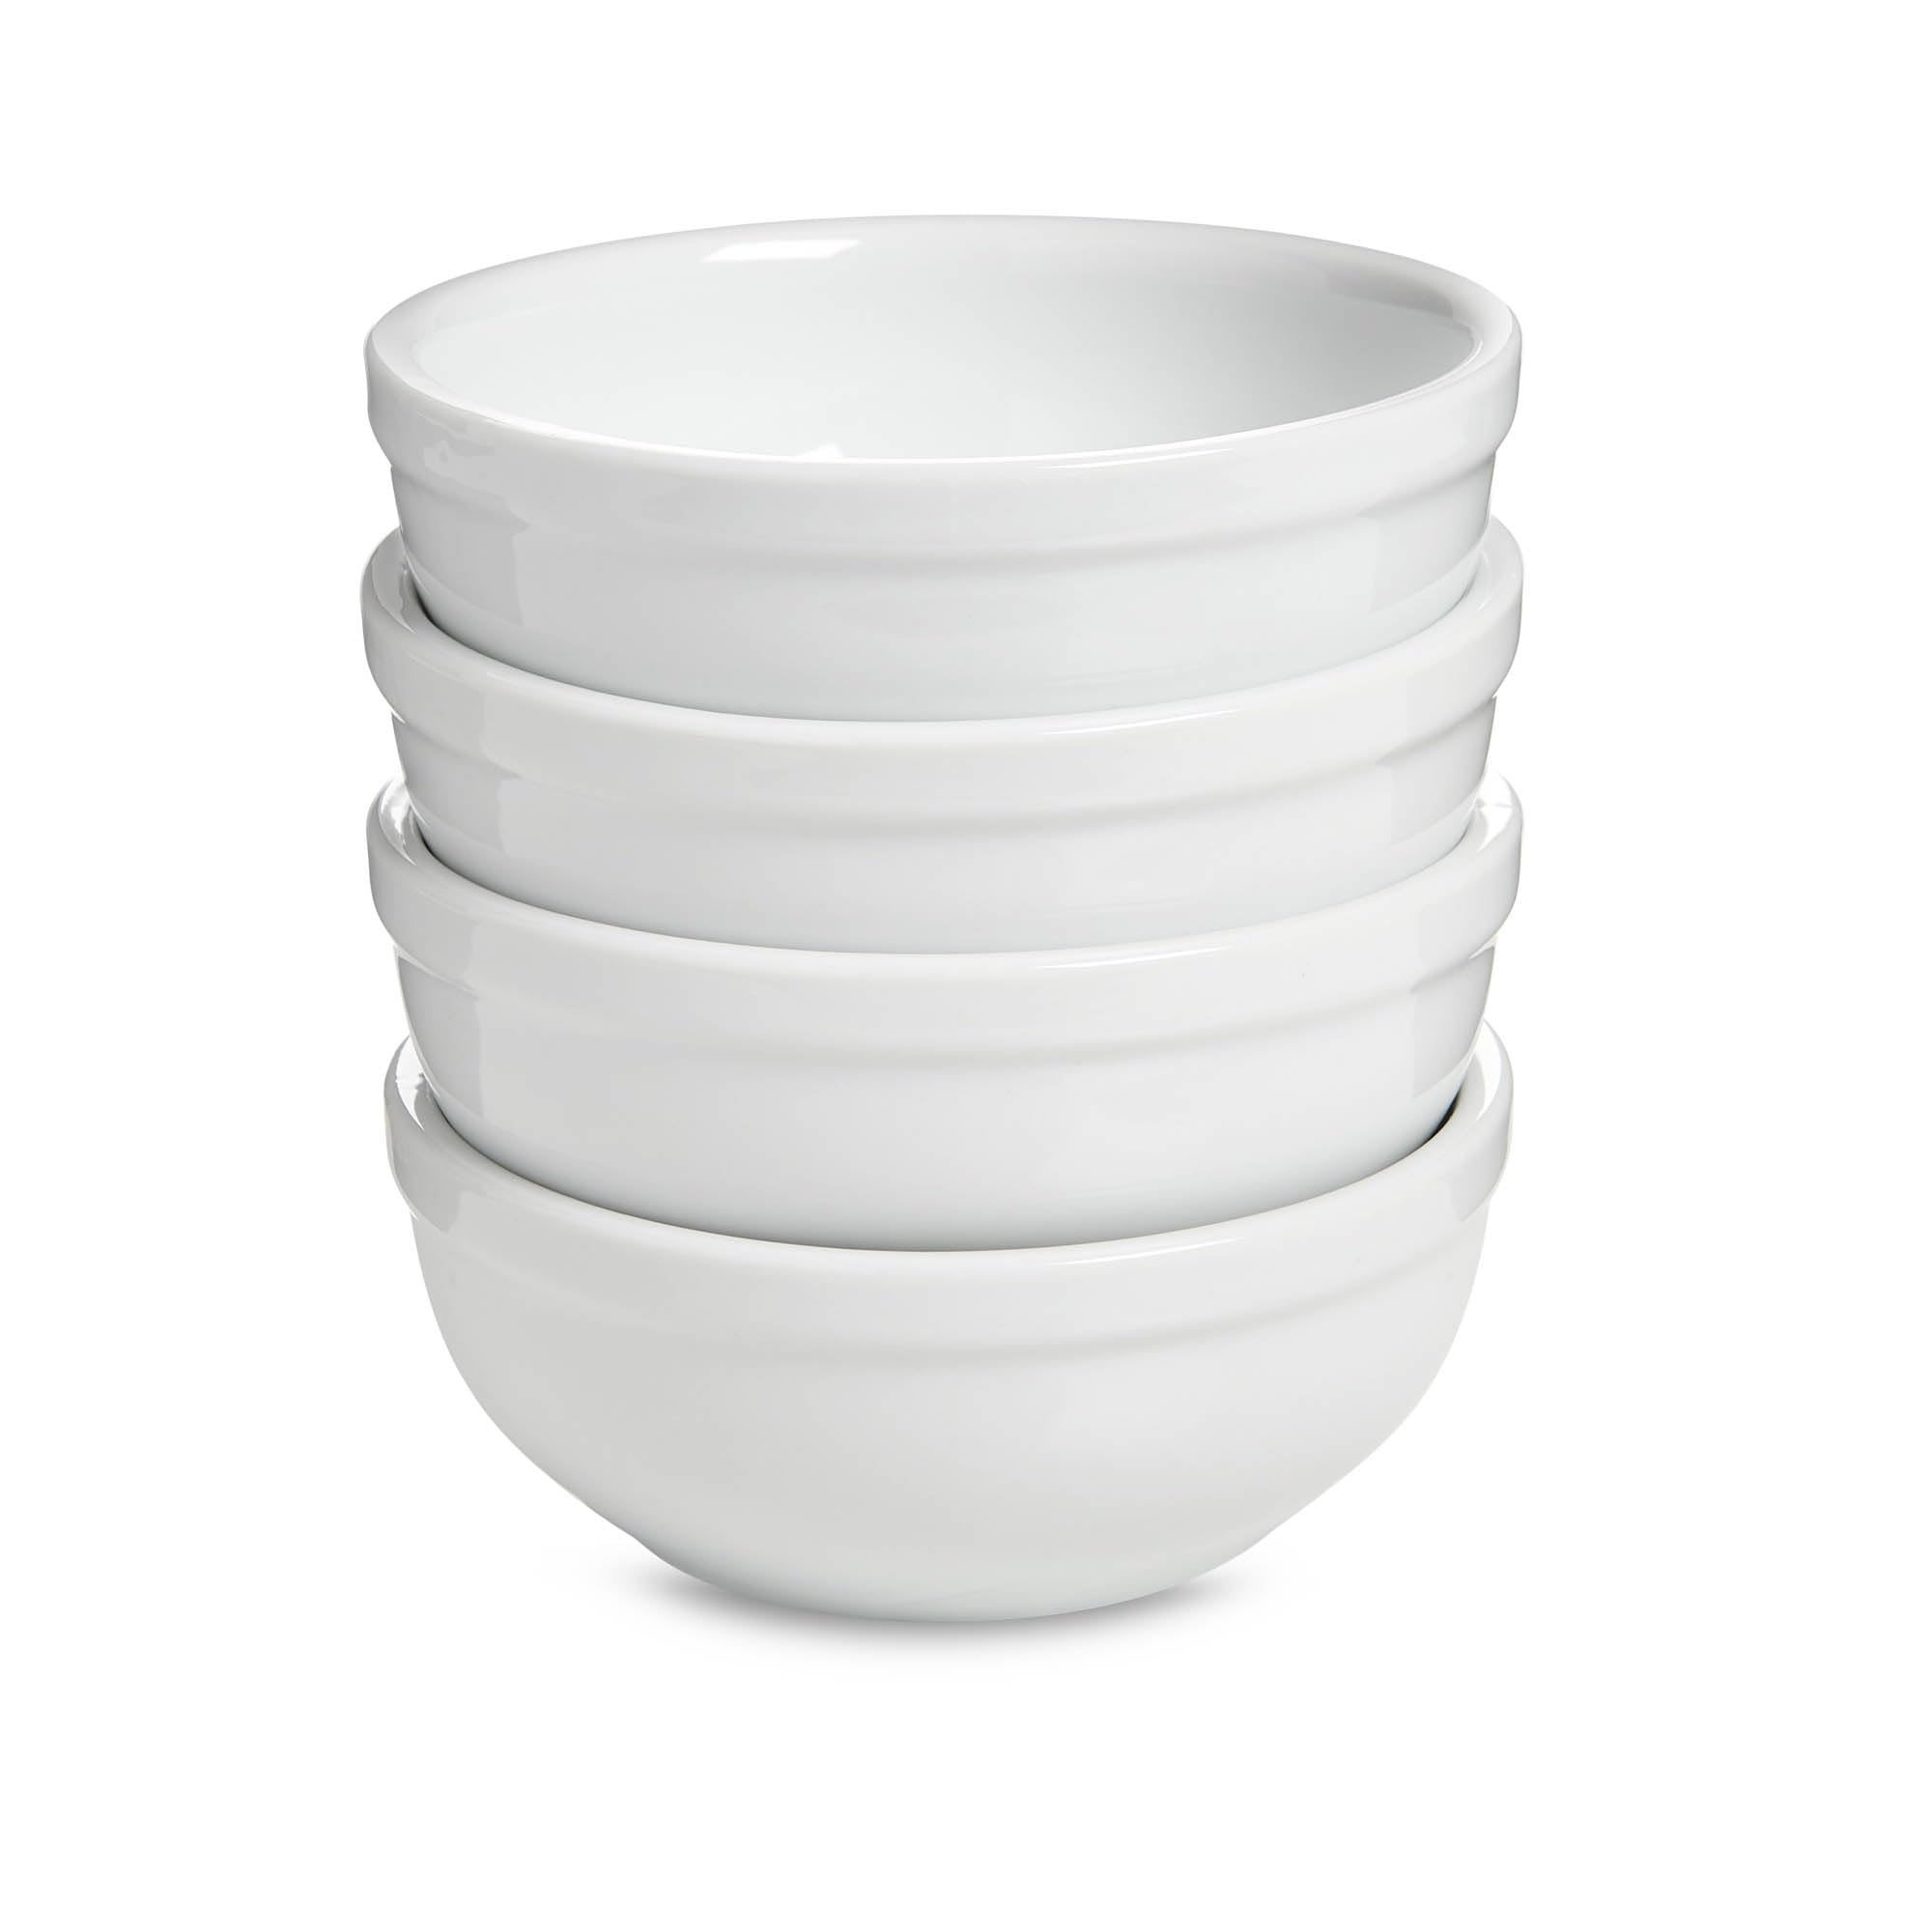 HIC Kitchen Chili, Soup and Cereal Bowls, Set of 4, Fine White Porcelain, 16-ounces